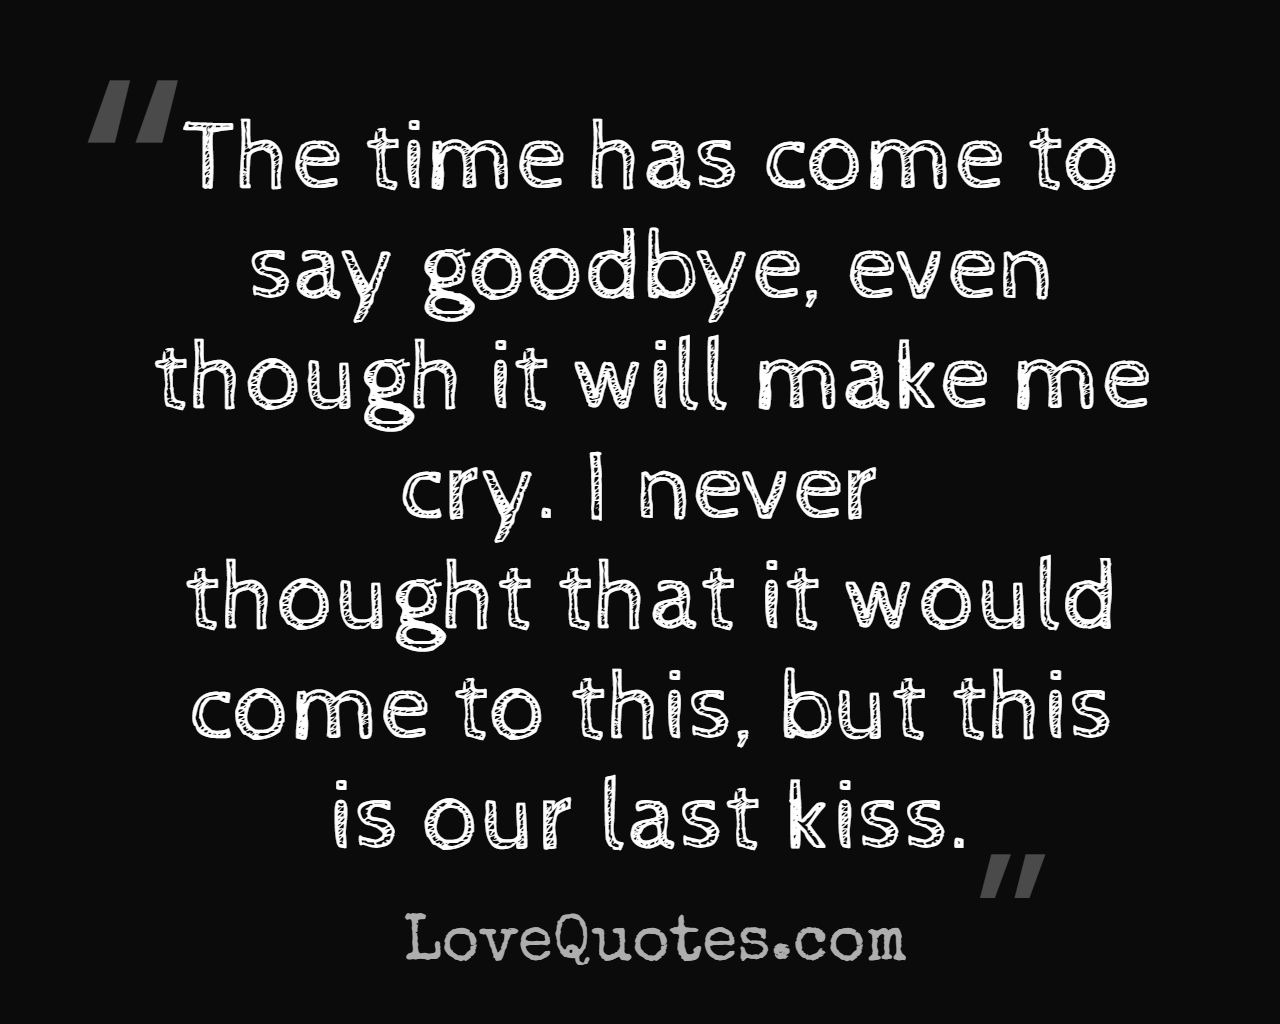 Our Last Kiss